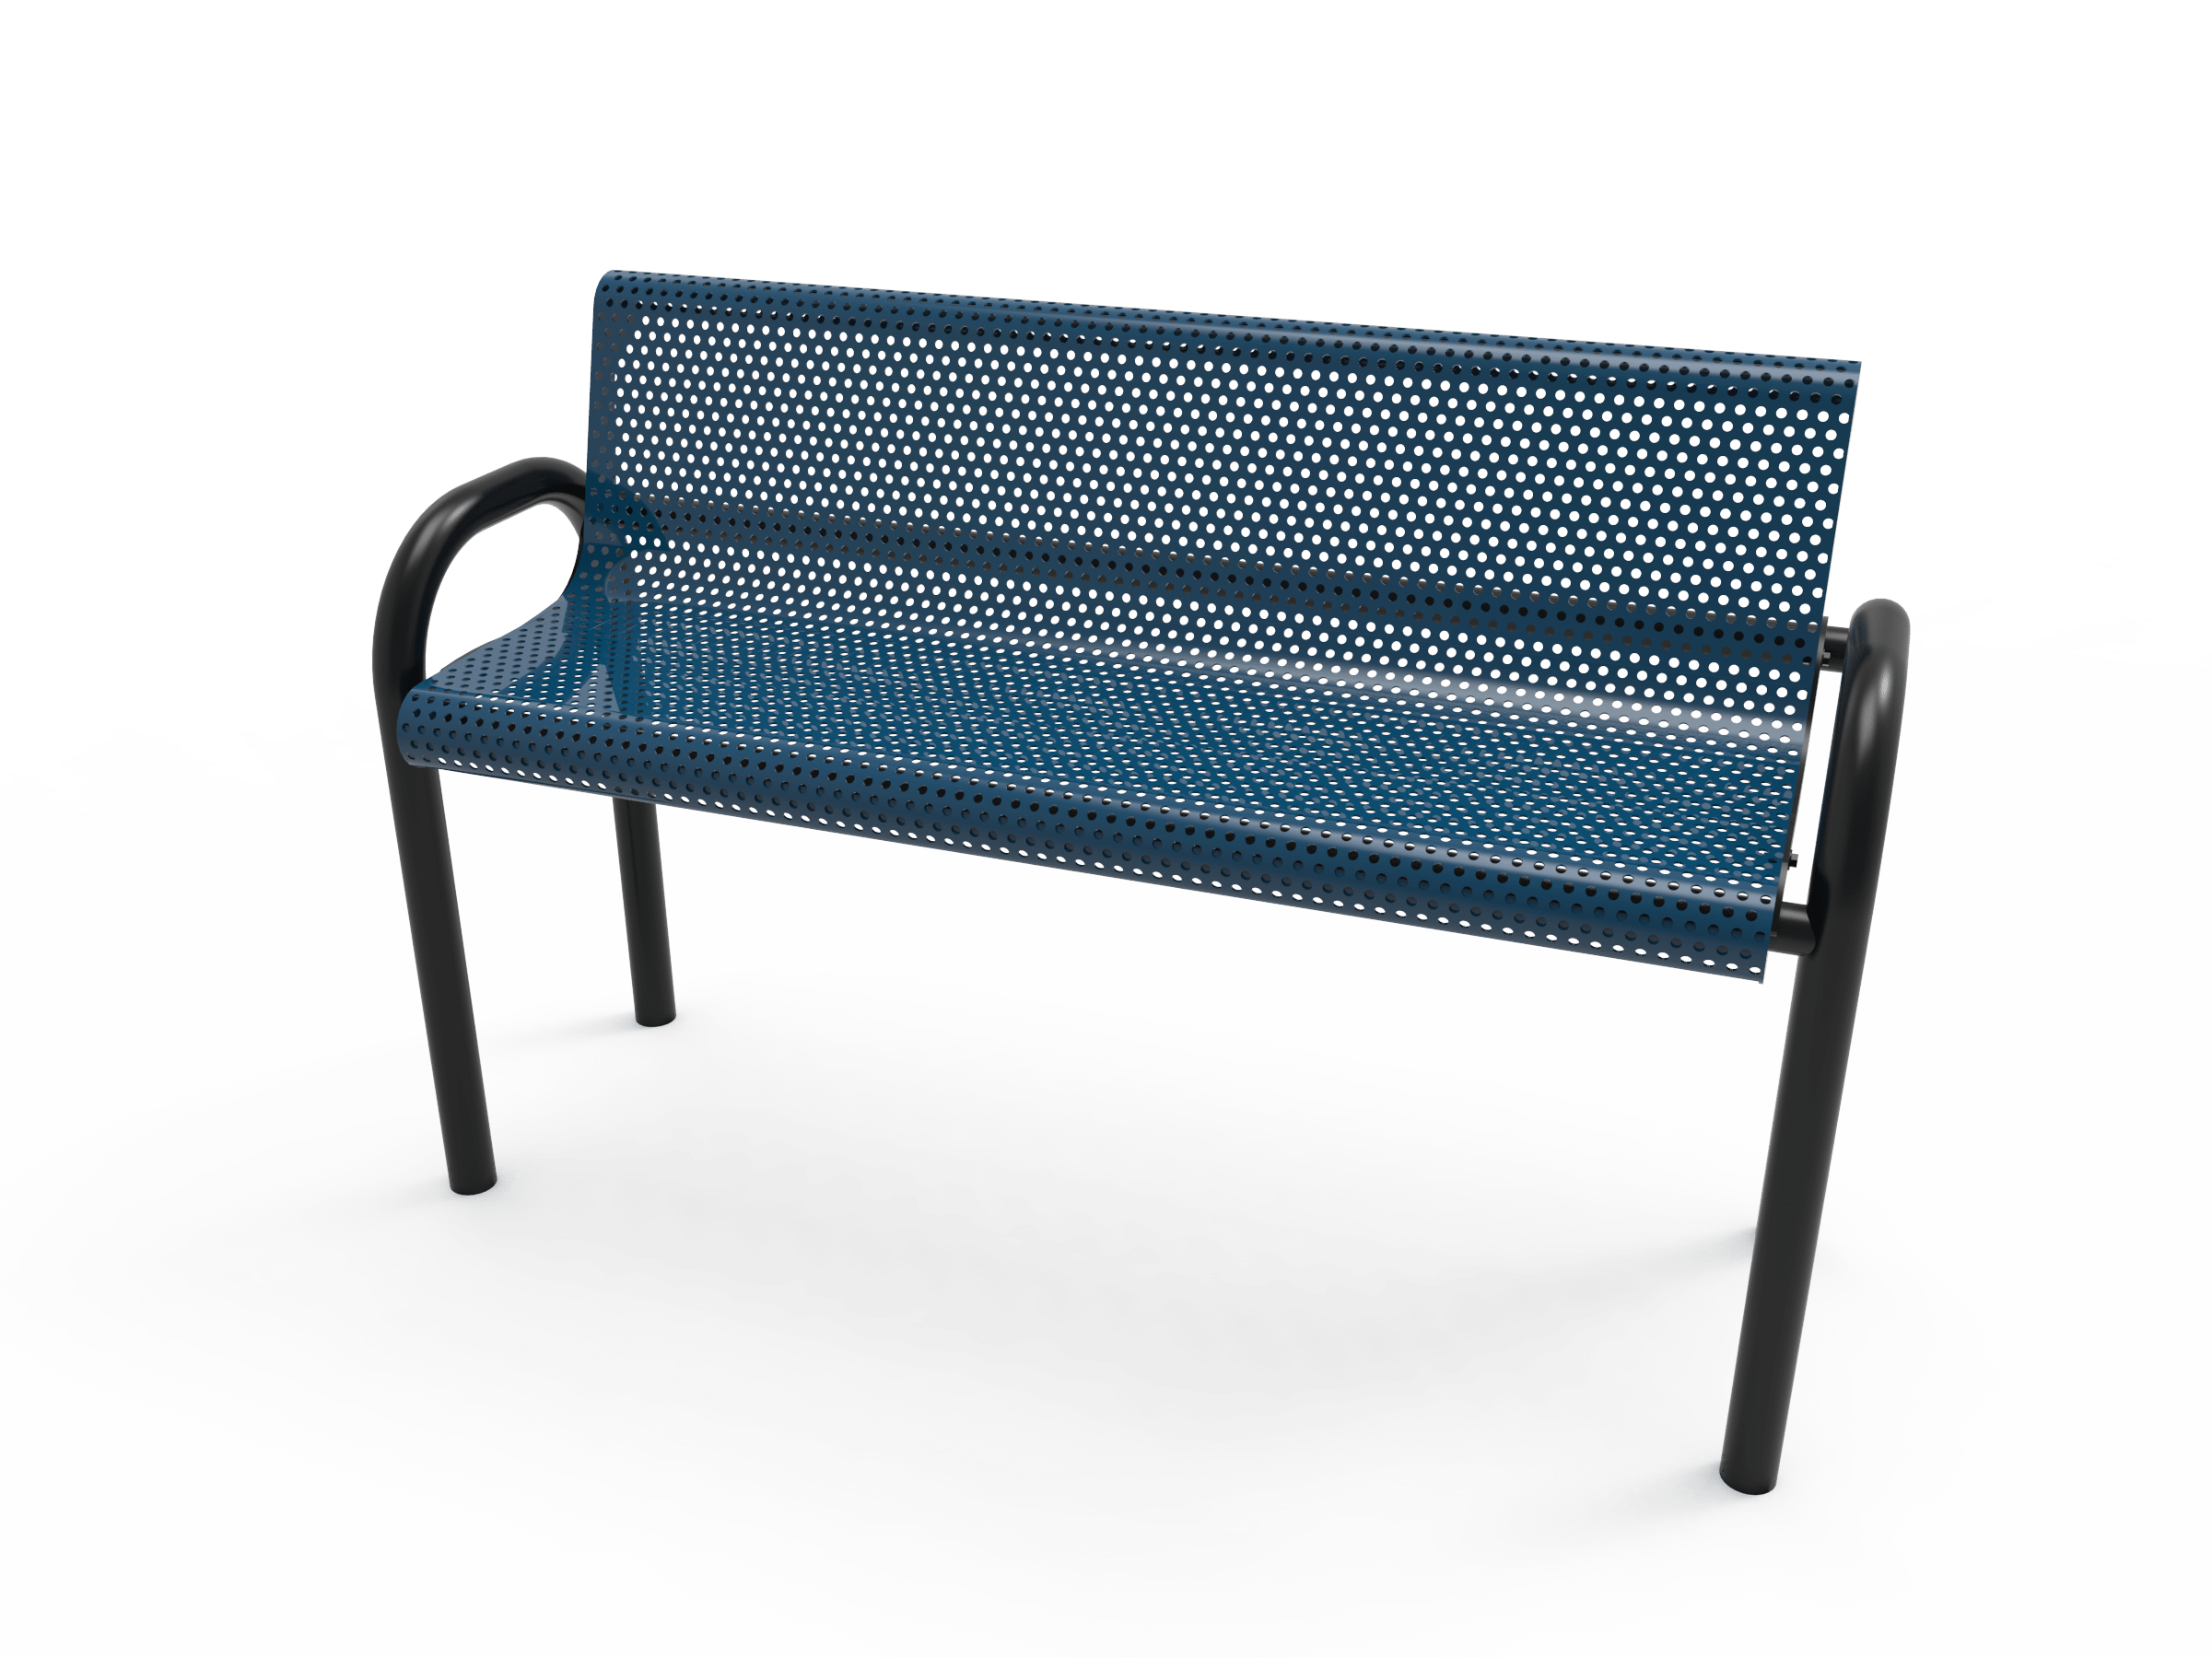 6′ Bench With Back In Ground-Punched
BMD06-D-53-000
Industry Standard Finish
$1259.00
BMD06-B-53-000
Advantage Premium Finish
$1569.00
